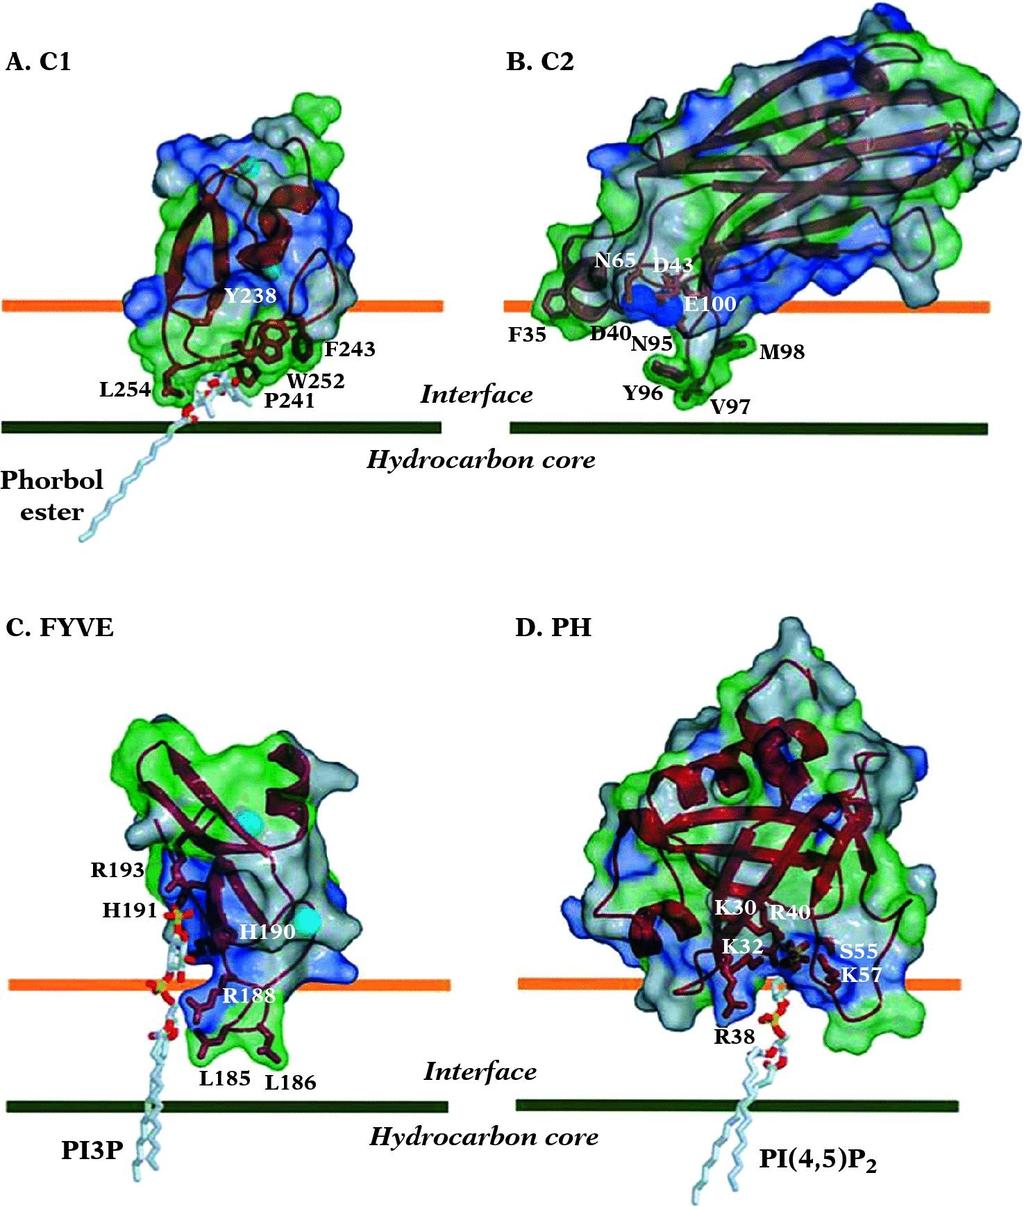 Review Membrane Binding Protein Binding Domains Protein Binding Domains C1, C2 and FYVE are seen in 100s of proteins and bind to polyphosporylated